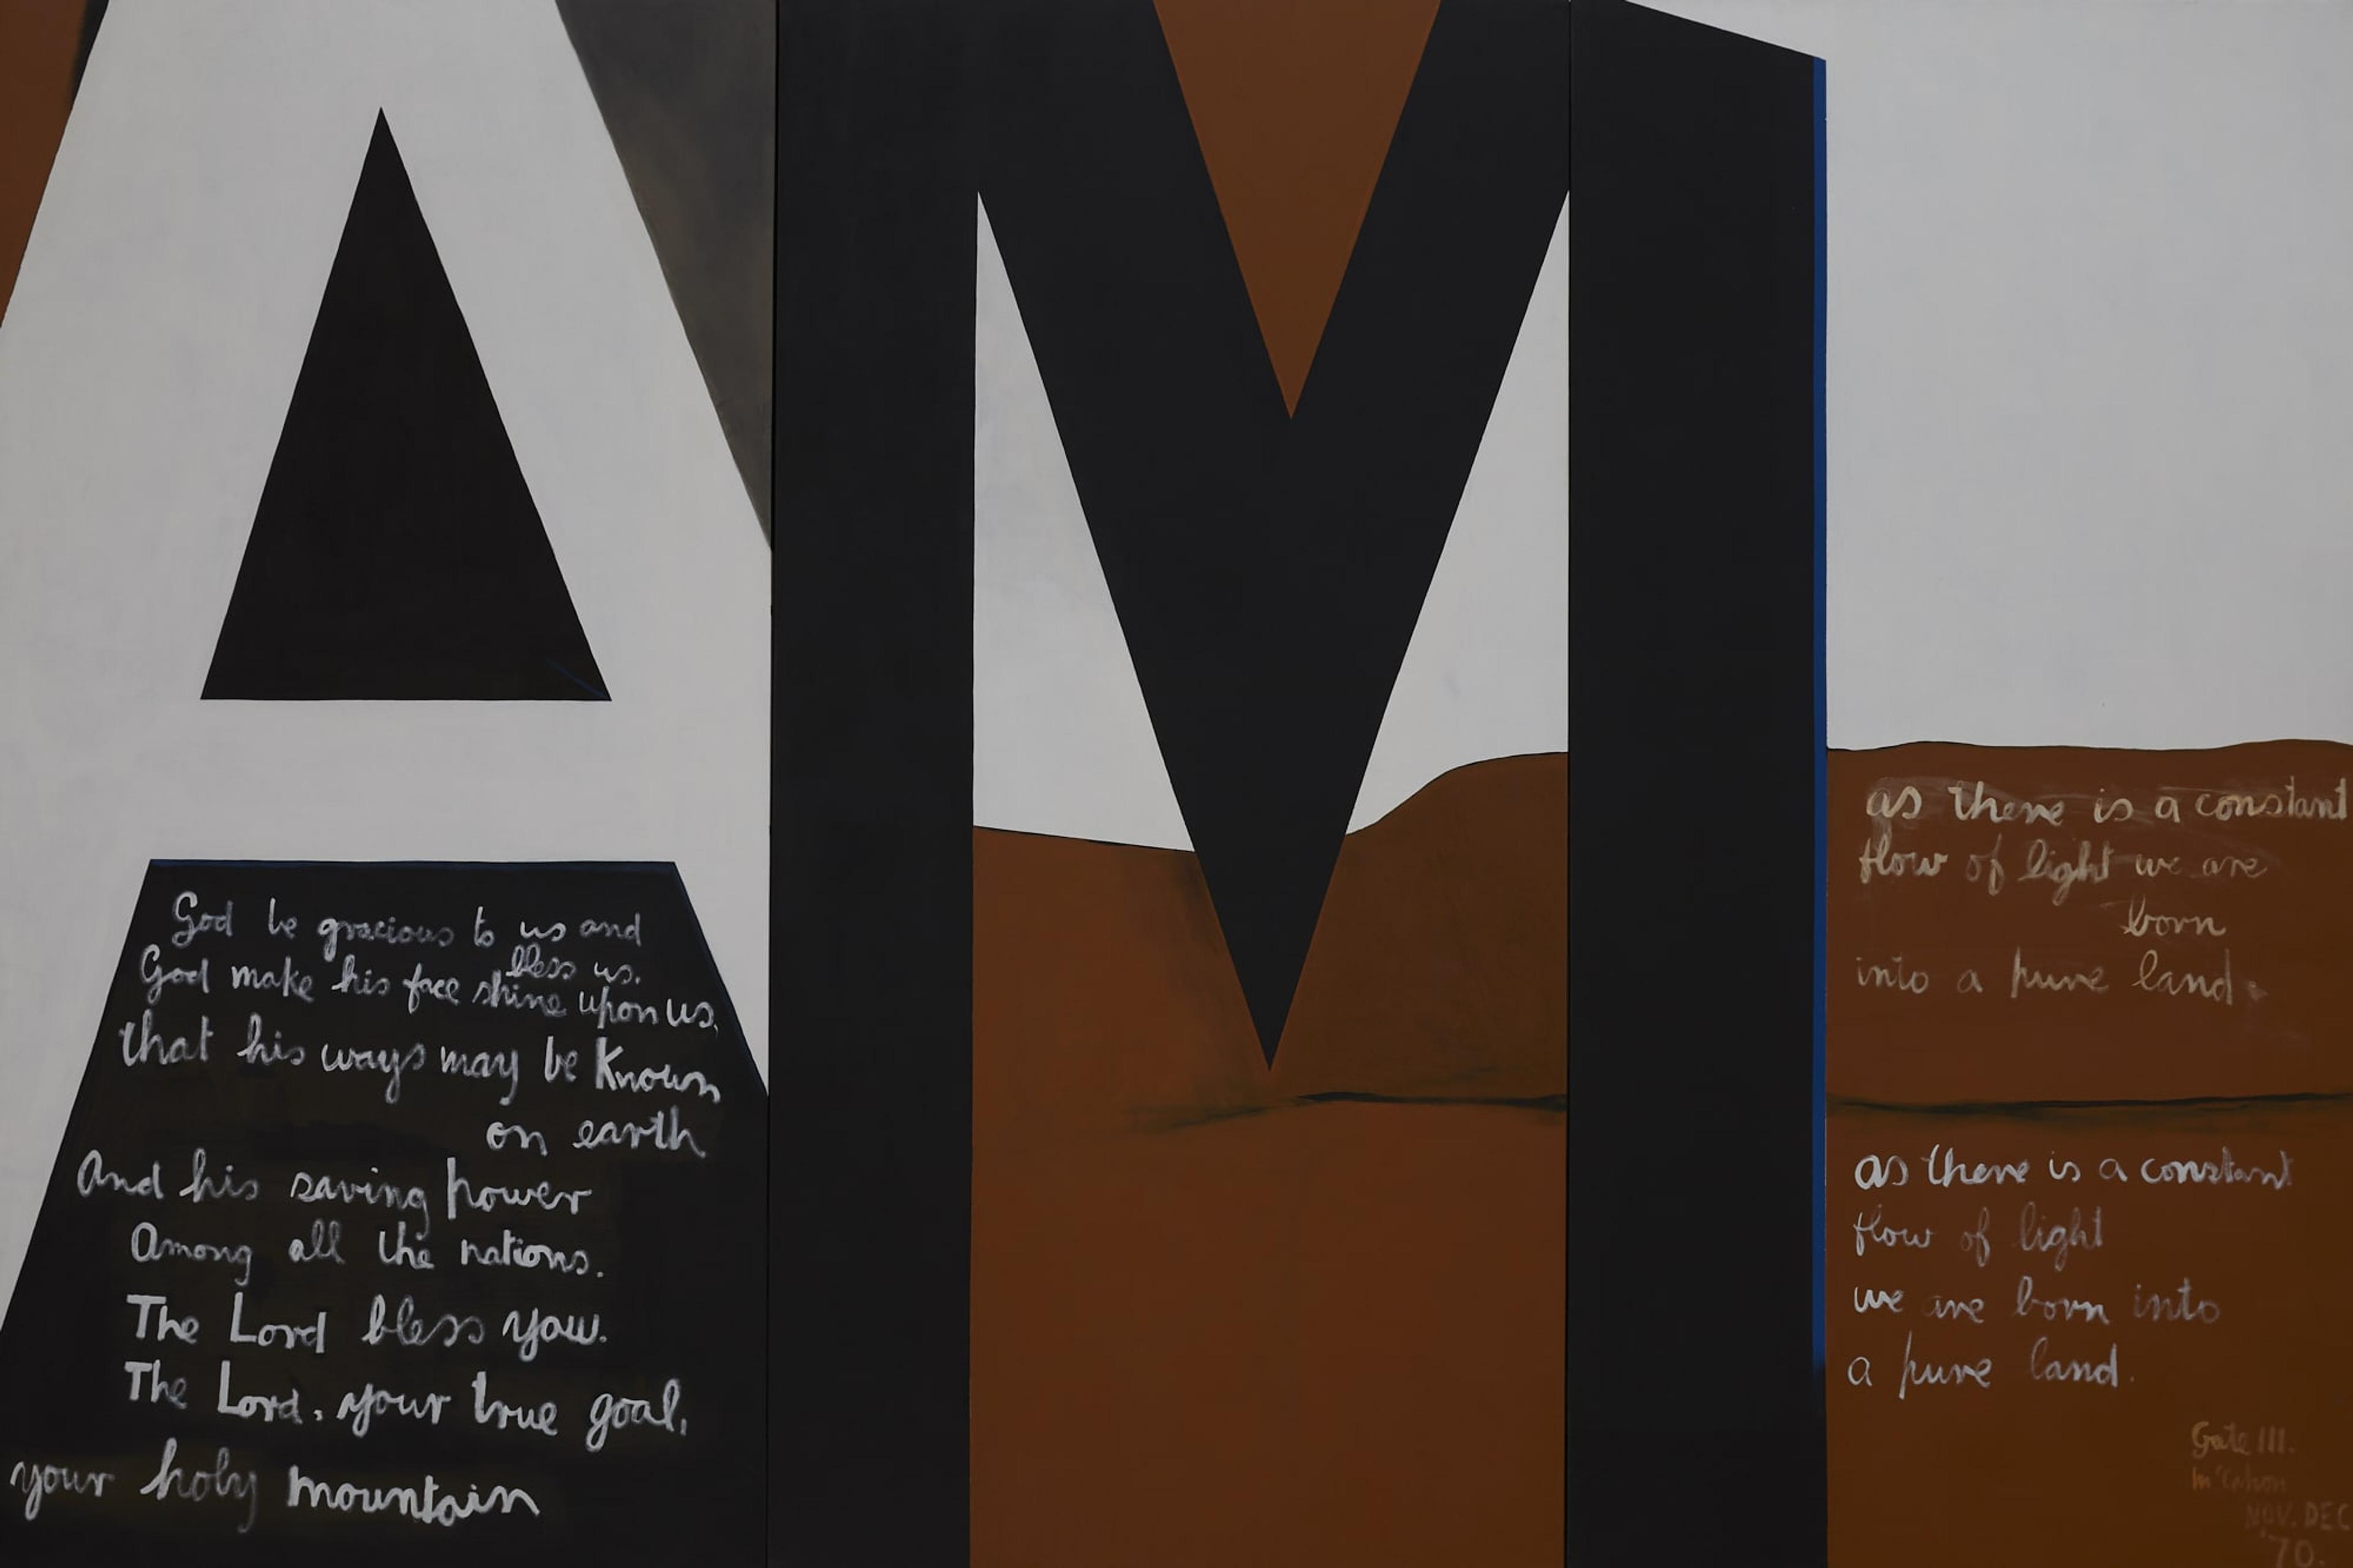 detail from Colin McCahon's 'Gate III'